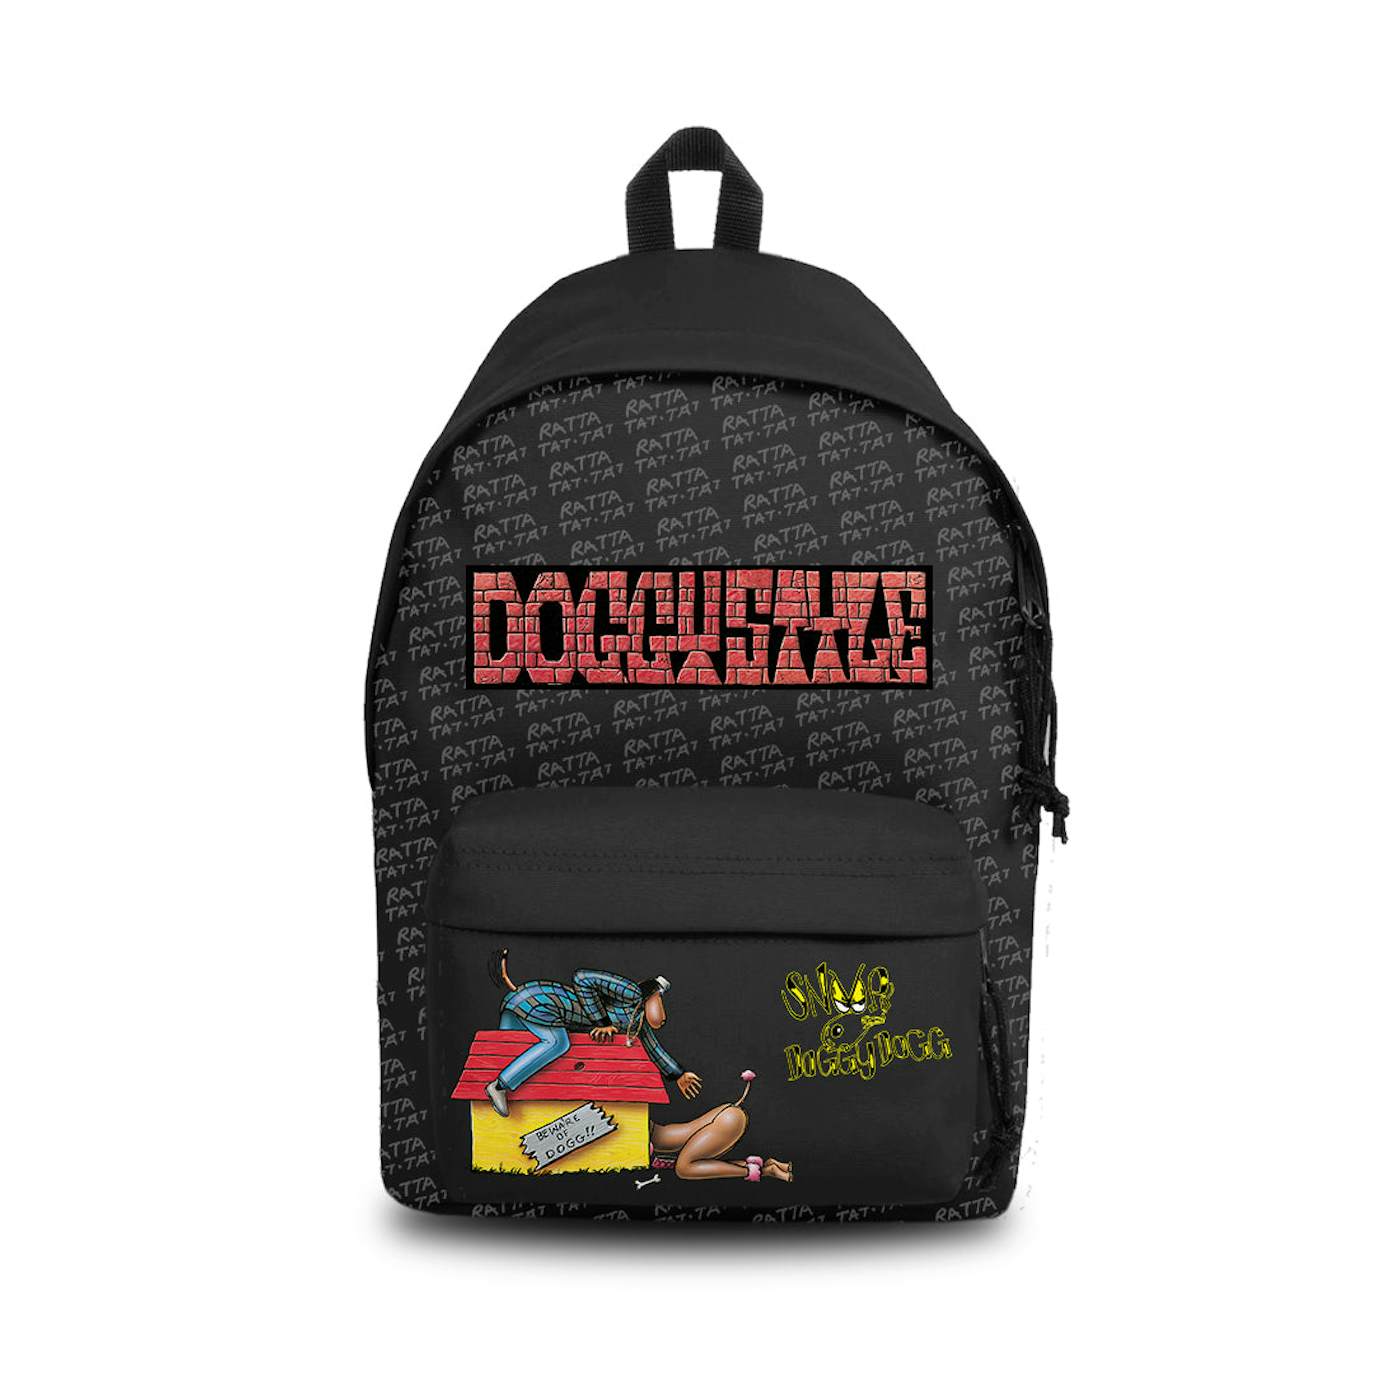 Rocksax Death Row Records Daypack - Doggystyle